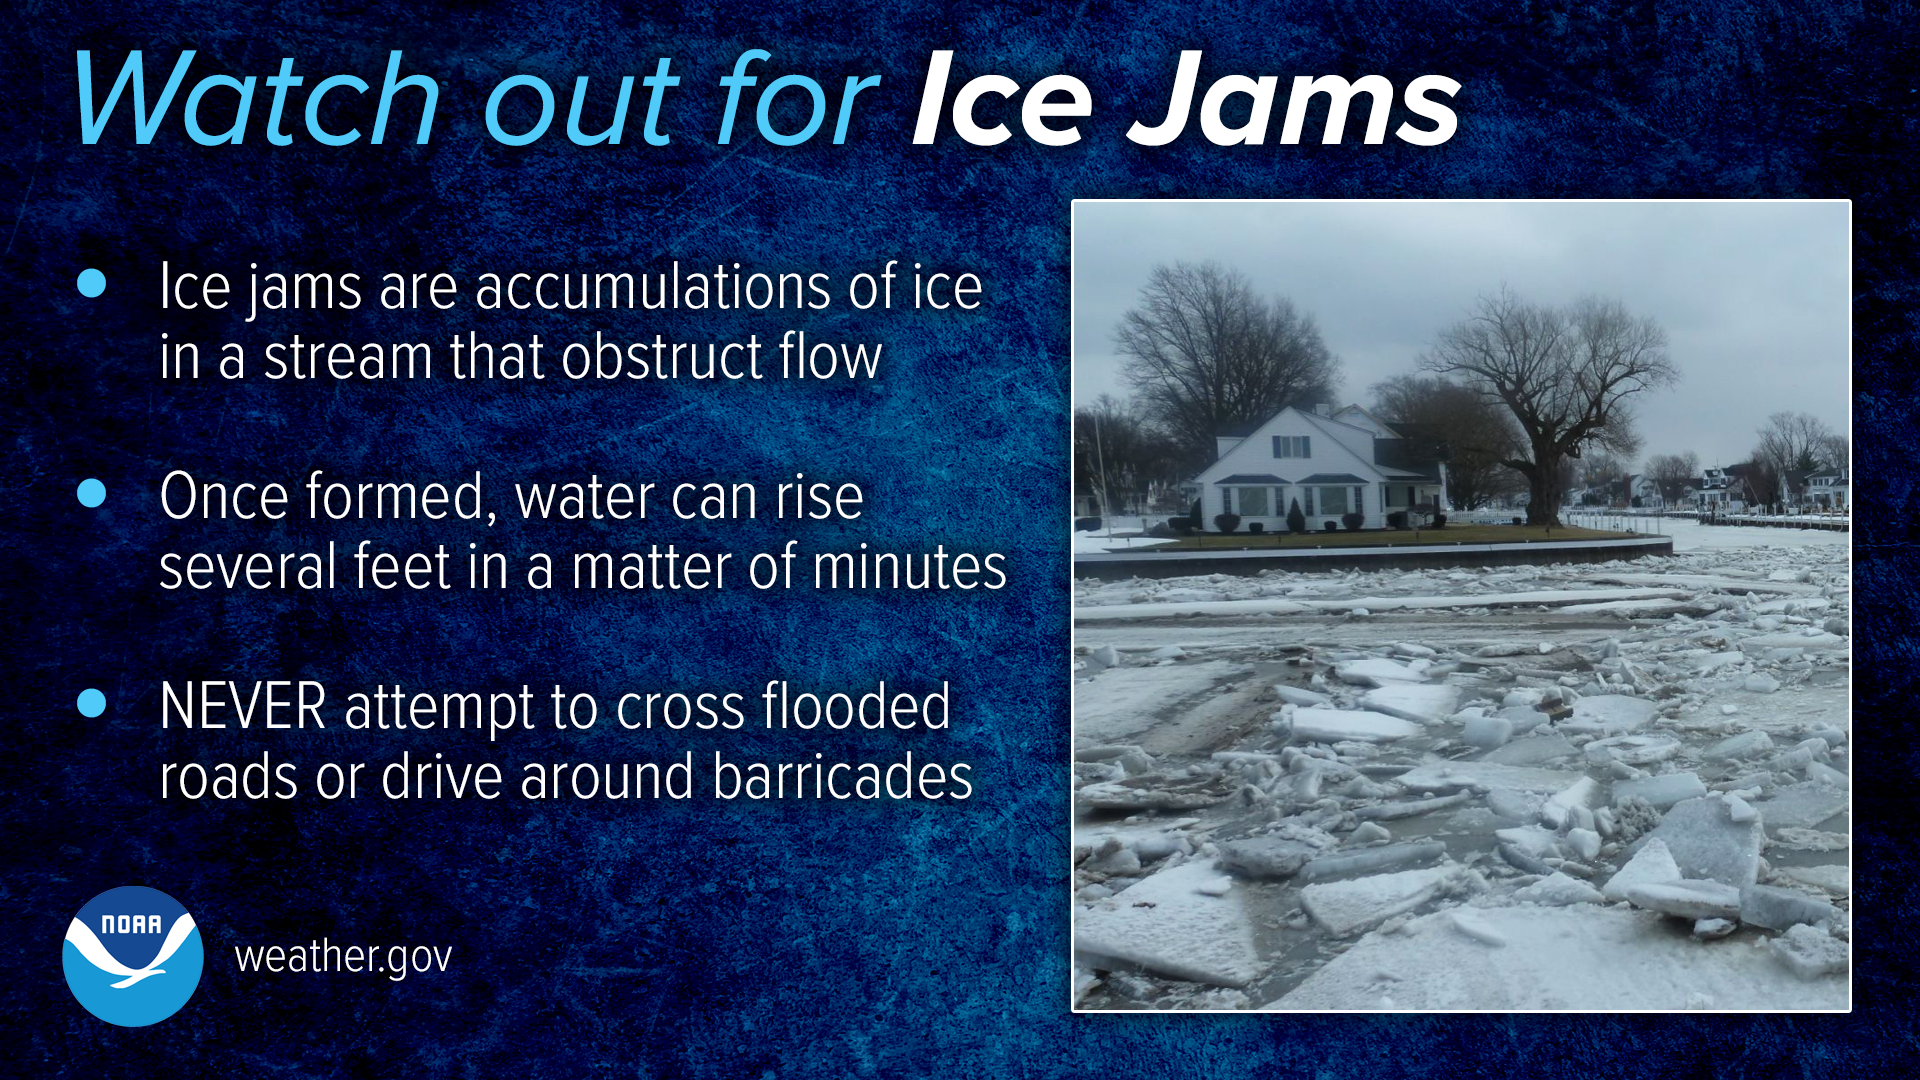 Watch out for ice jams! Ice jams are accumulations of ice in a stream that obstruct flow. Once formed, water can rise several feet in a matter of minutes. Never attempt to cross flooded roads or drive around barricades.